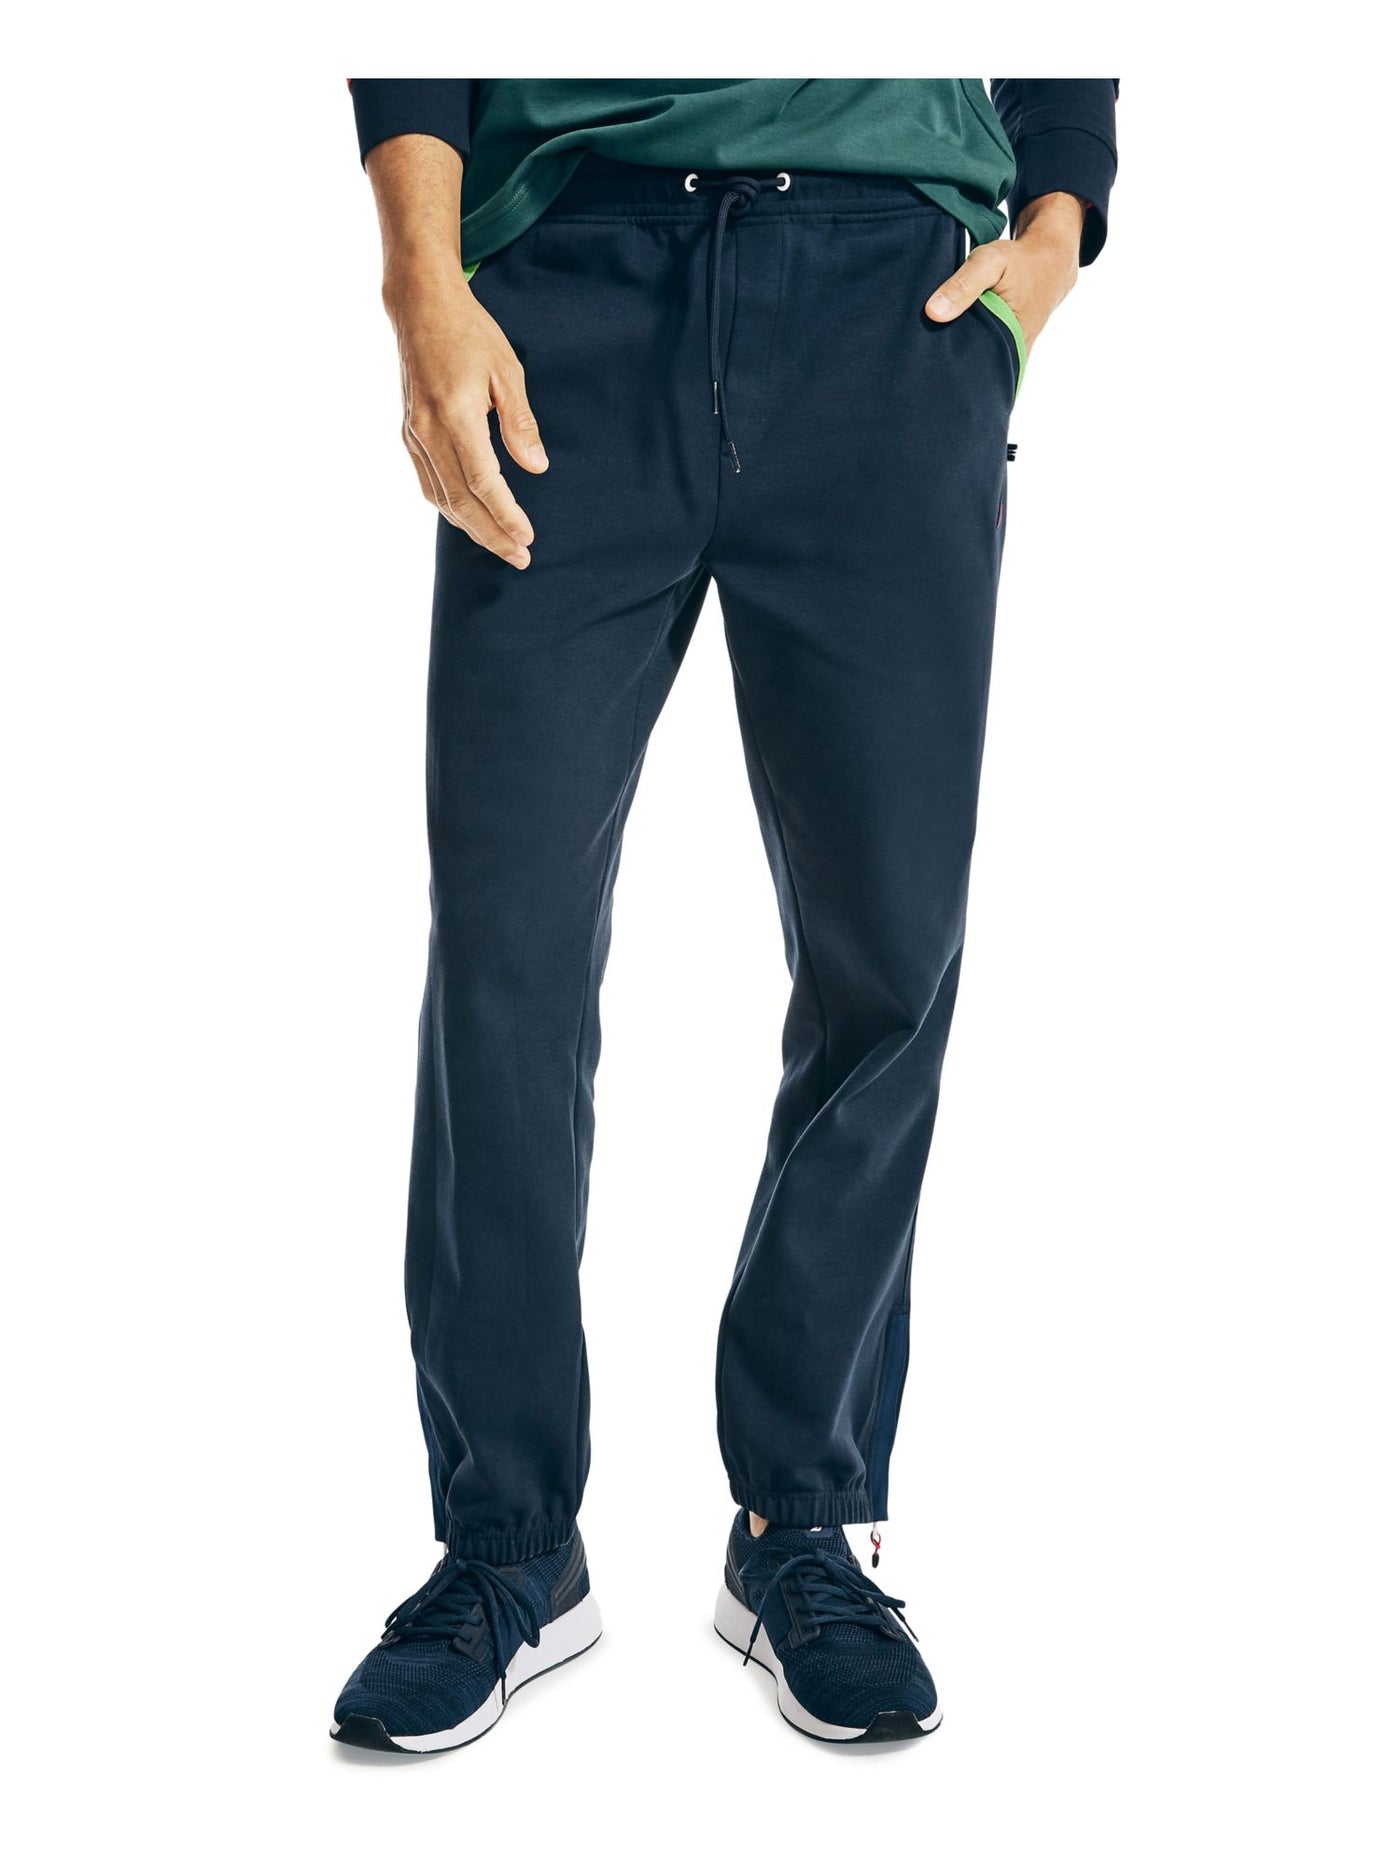 NAUTICA Mens Navy Classic Fit Moisture Wicking Joggers S